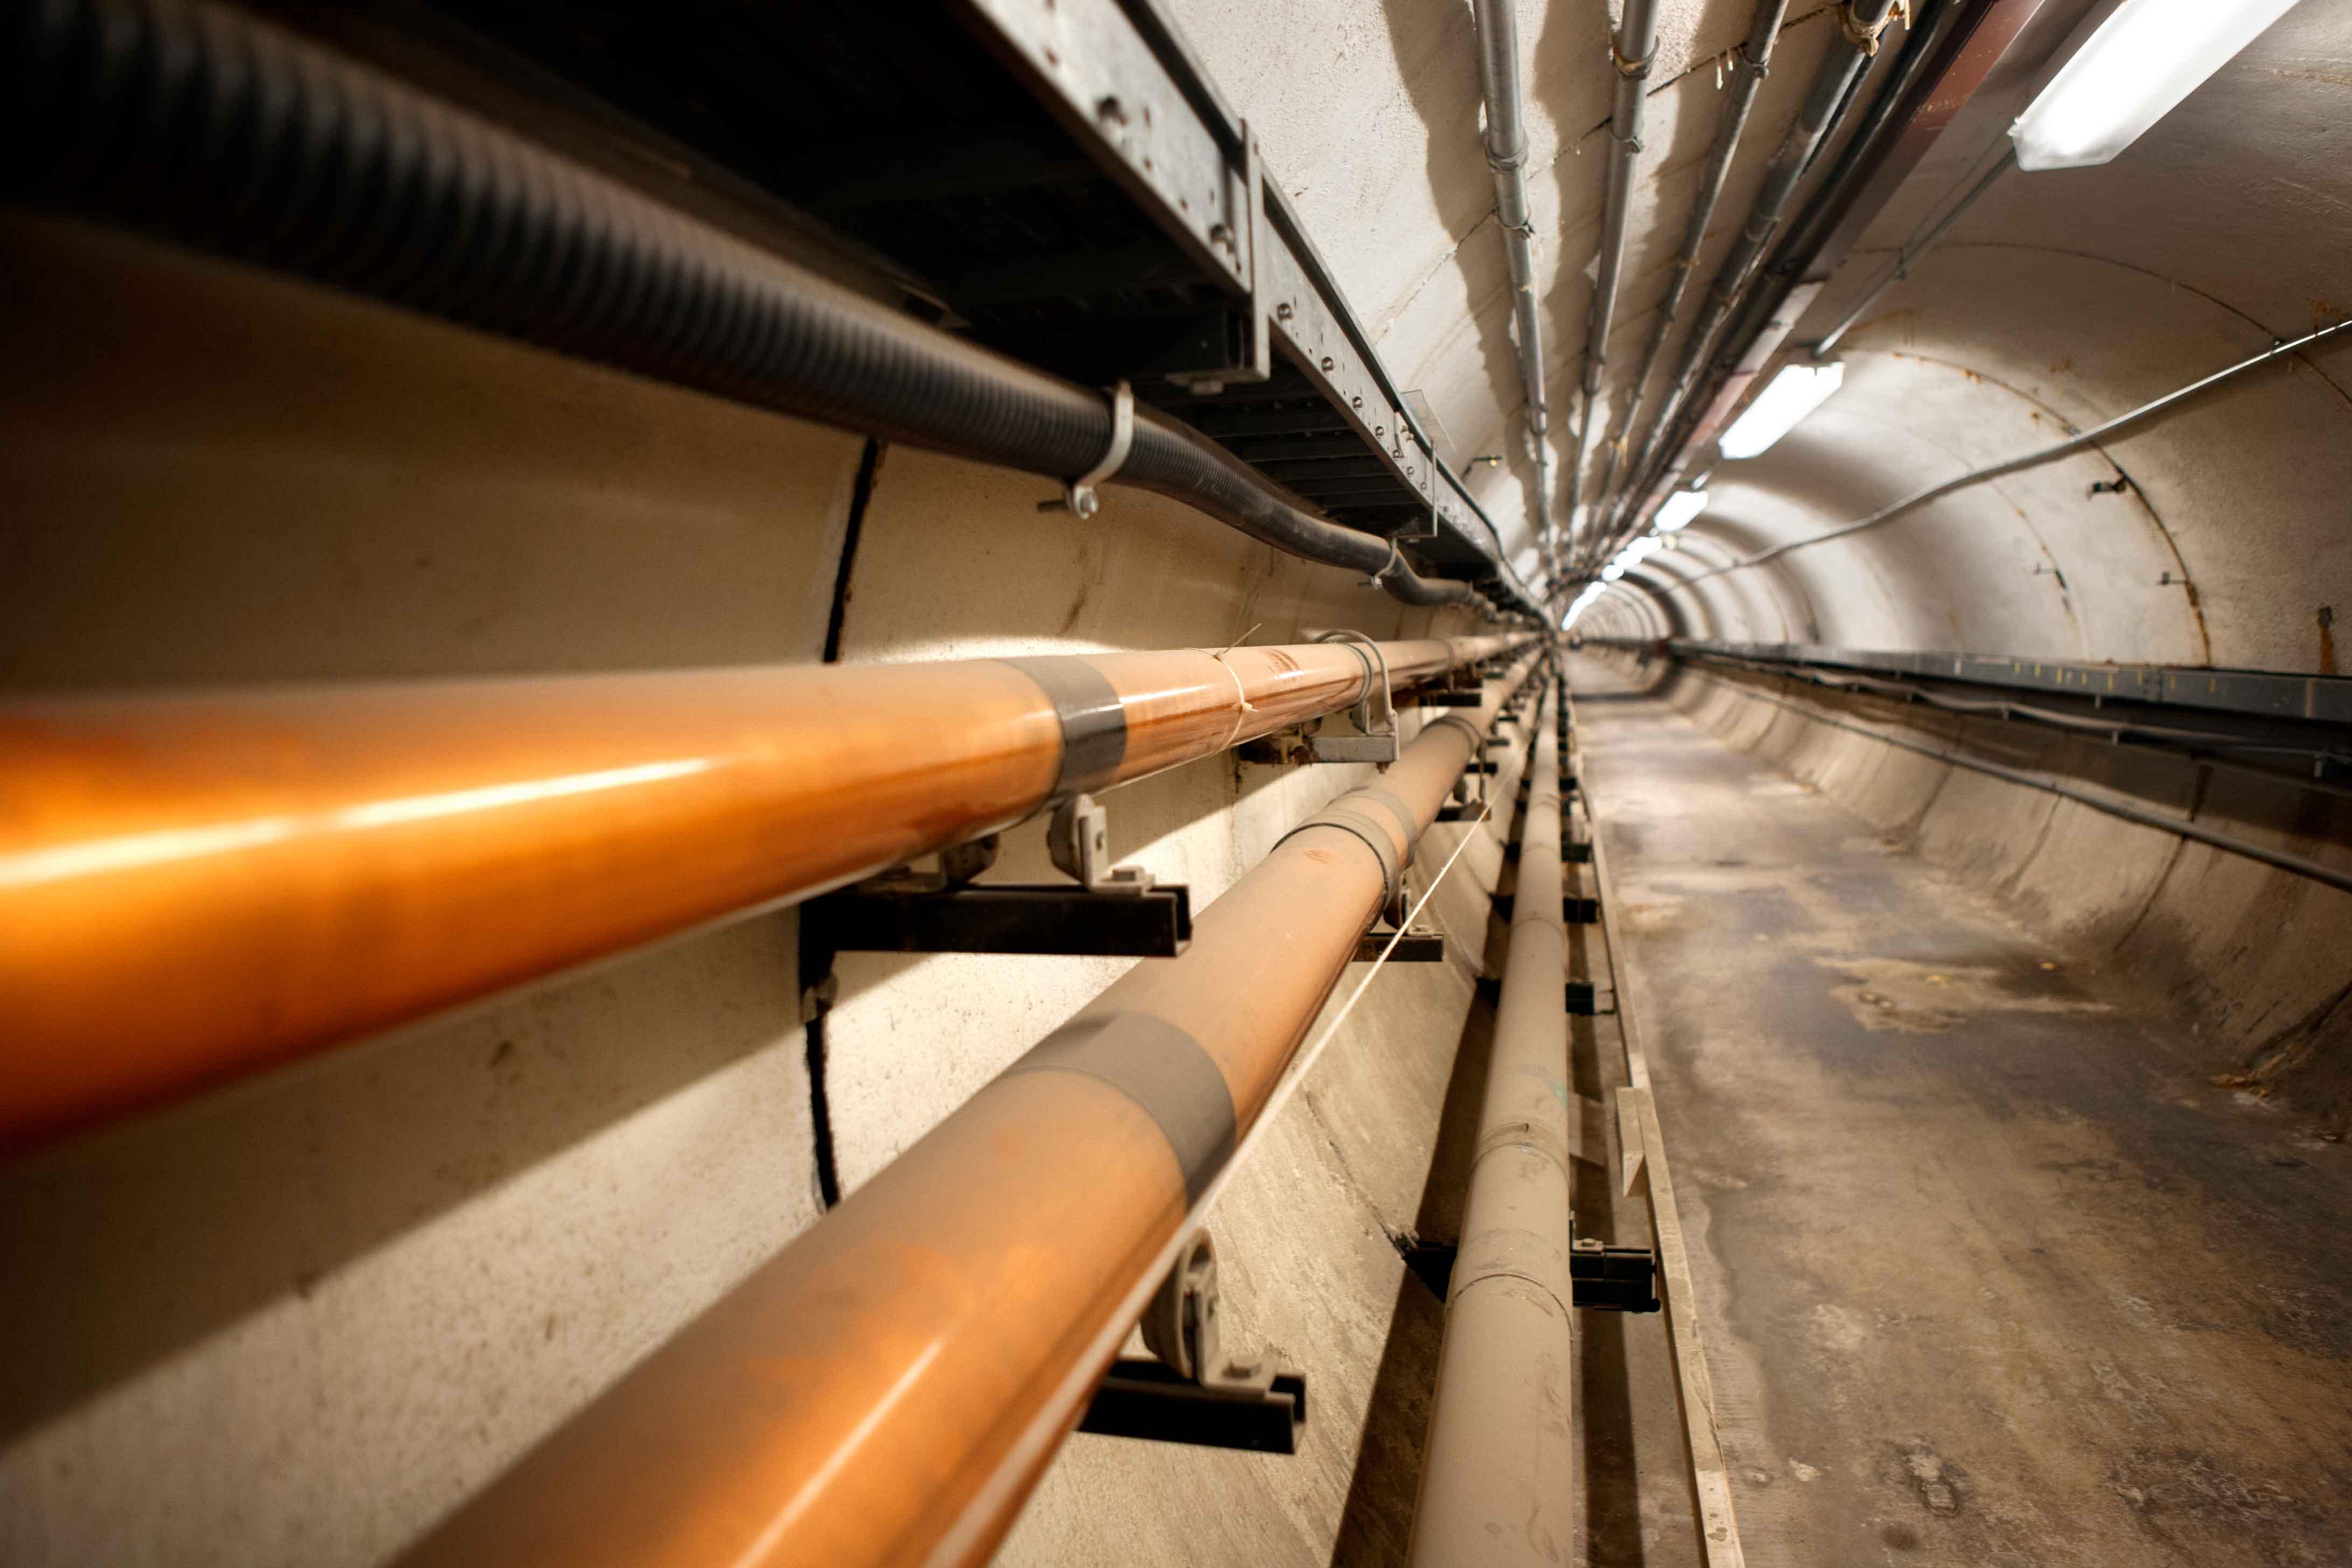 A long cement tunnel with pipes and cables running along it.